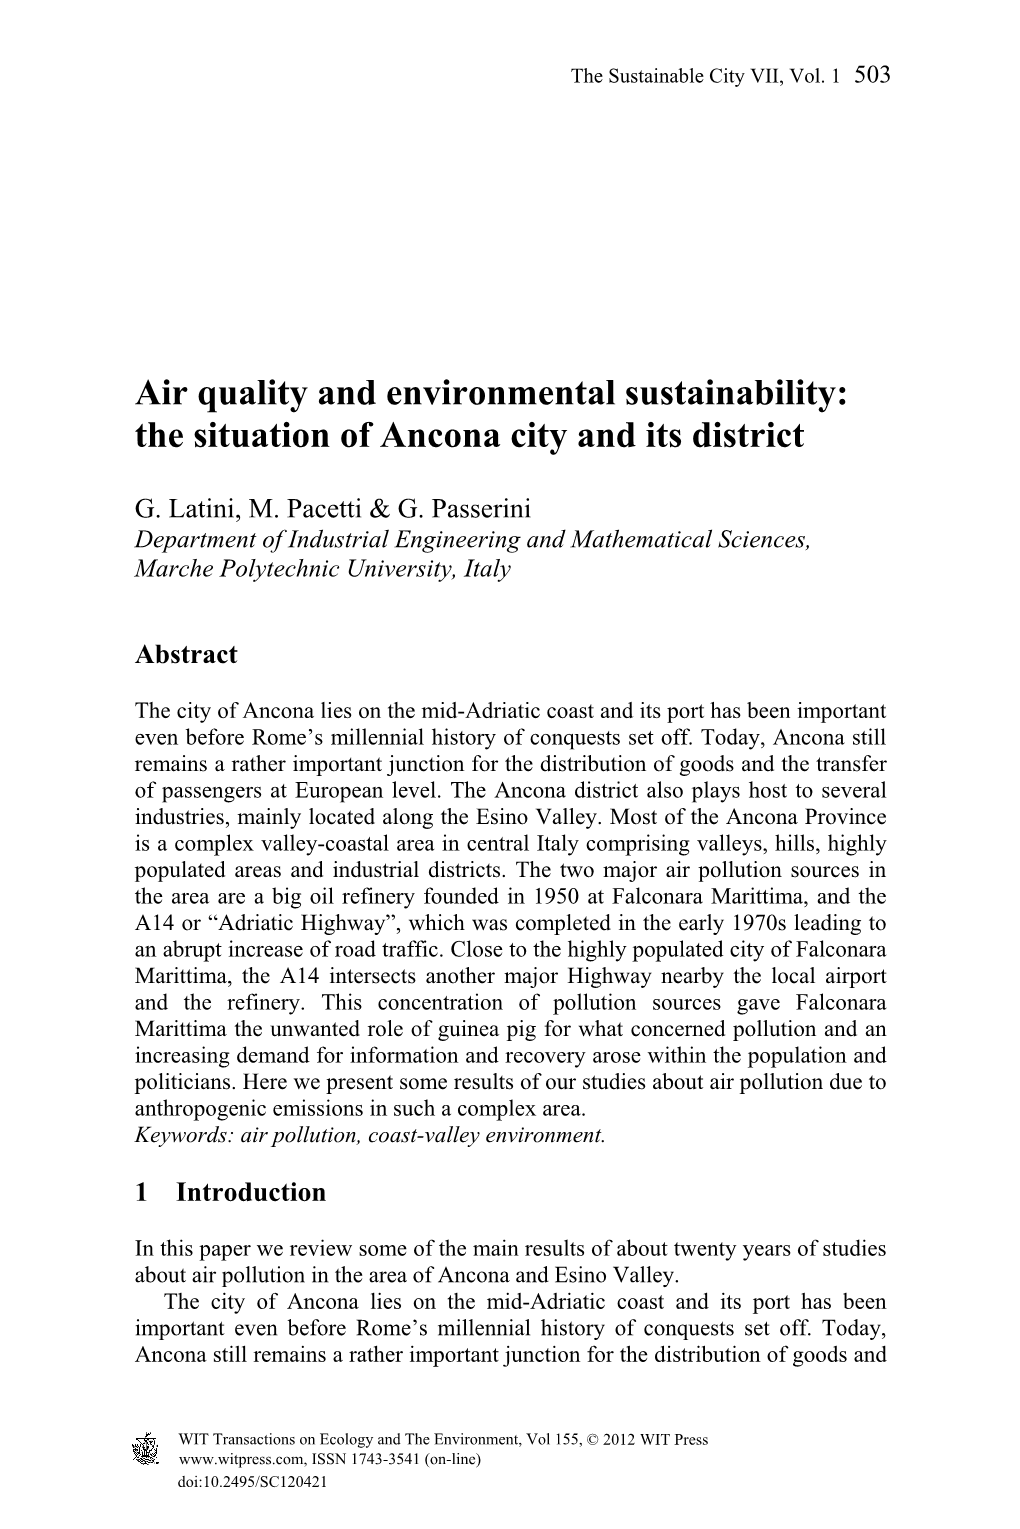 Air Quality and Environmental Sustainability: the Situation of Ancona City and Its District